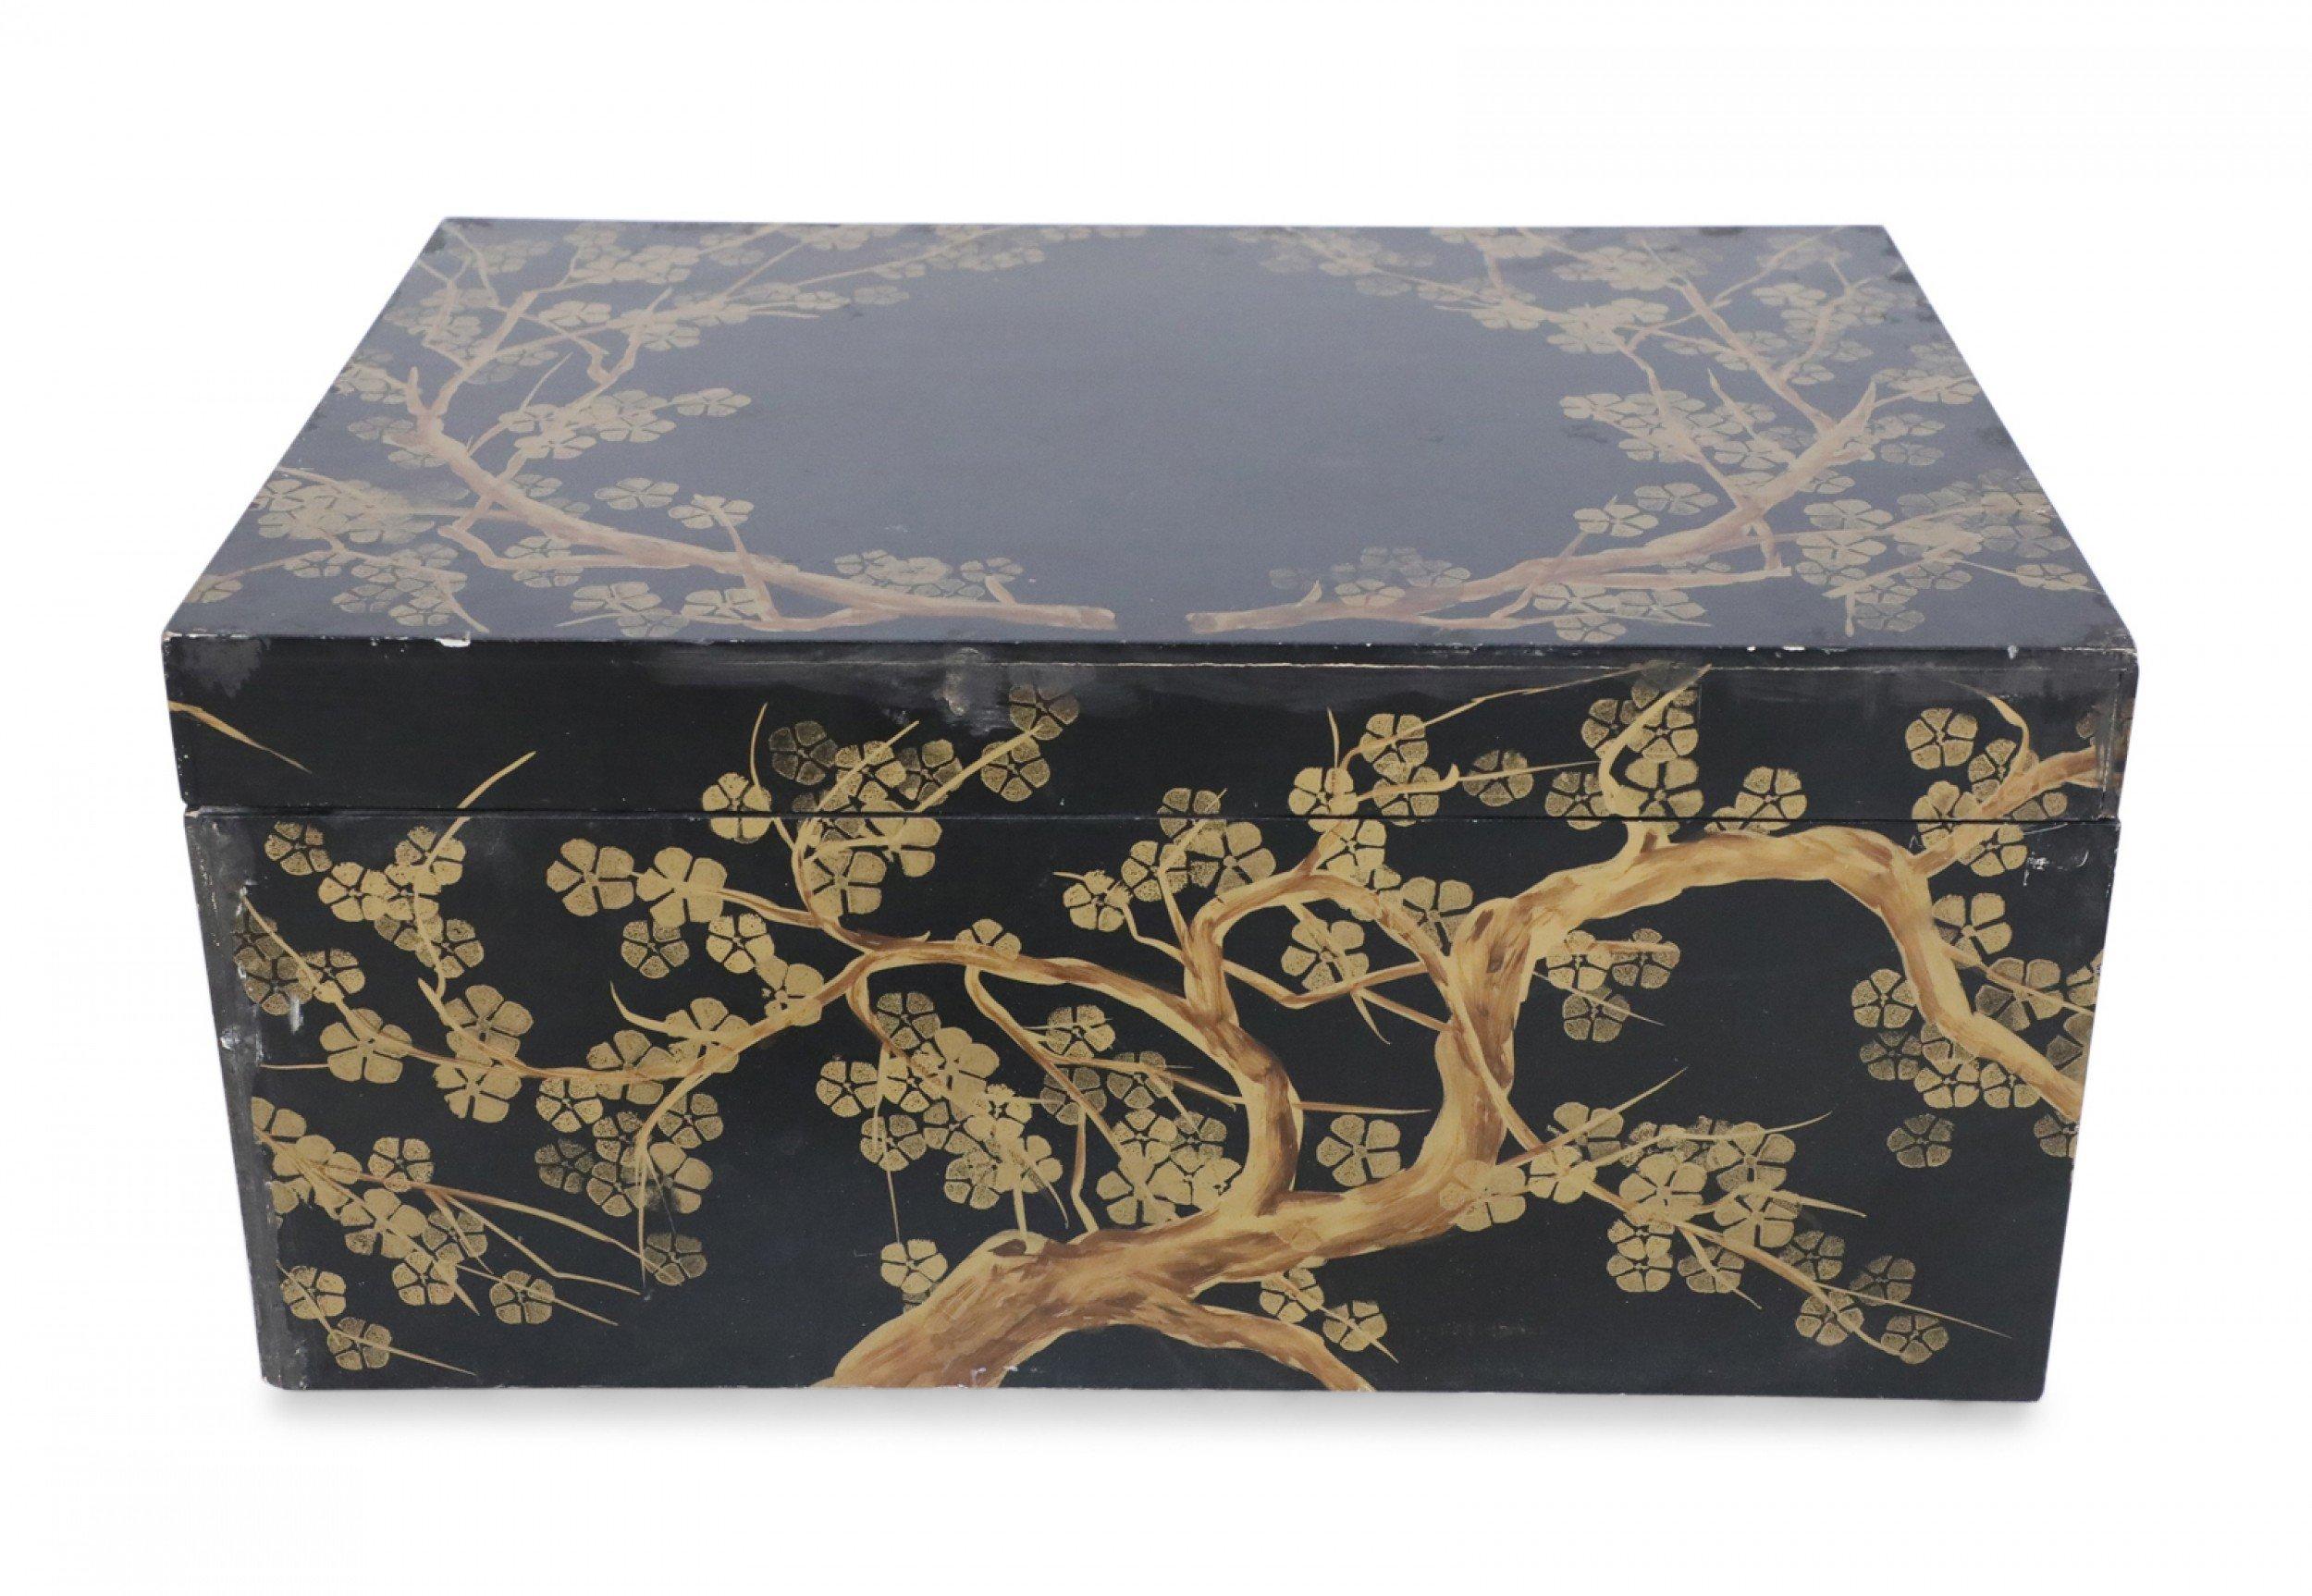 Metal Chinese Gold and Black Painted Cherry Blossom Motif Decorative Box For Sale